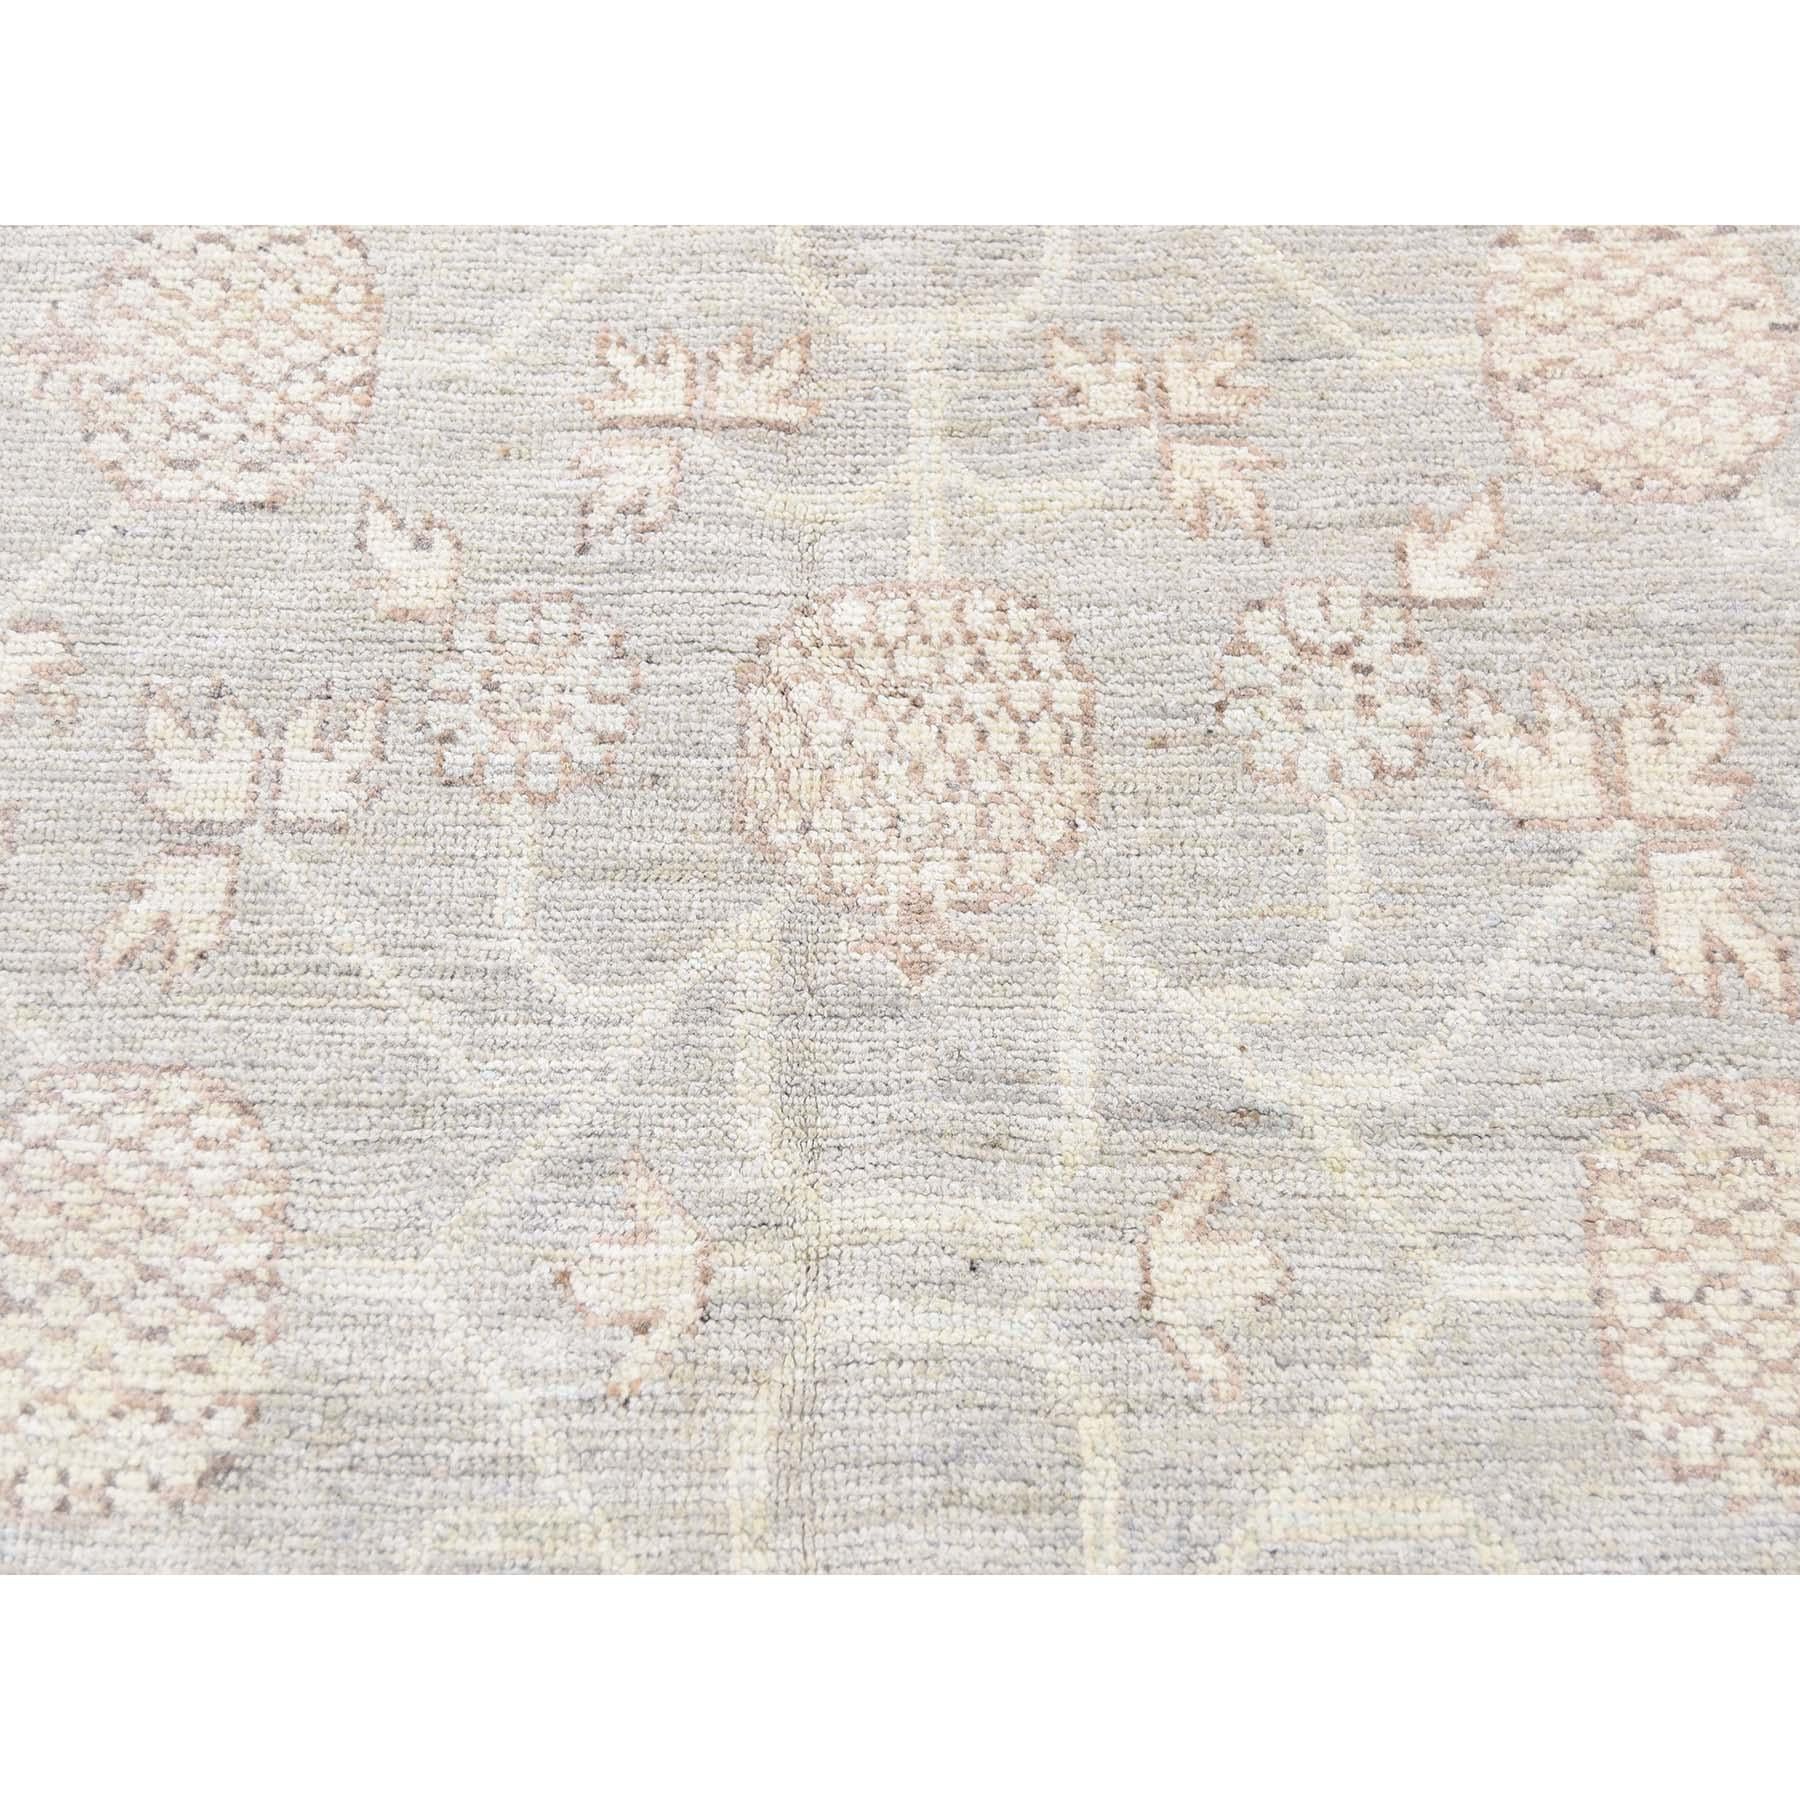 Khotan with Pomegranate Design Silver Wash Hand Knotted Oriental Rug 2